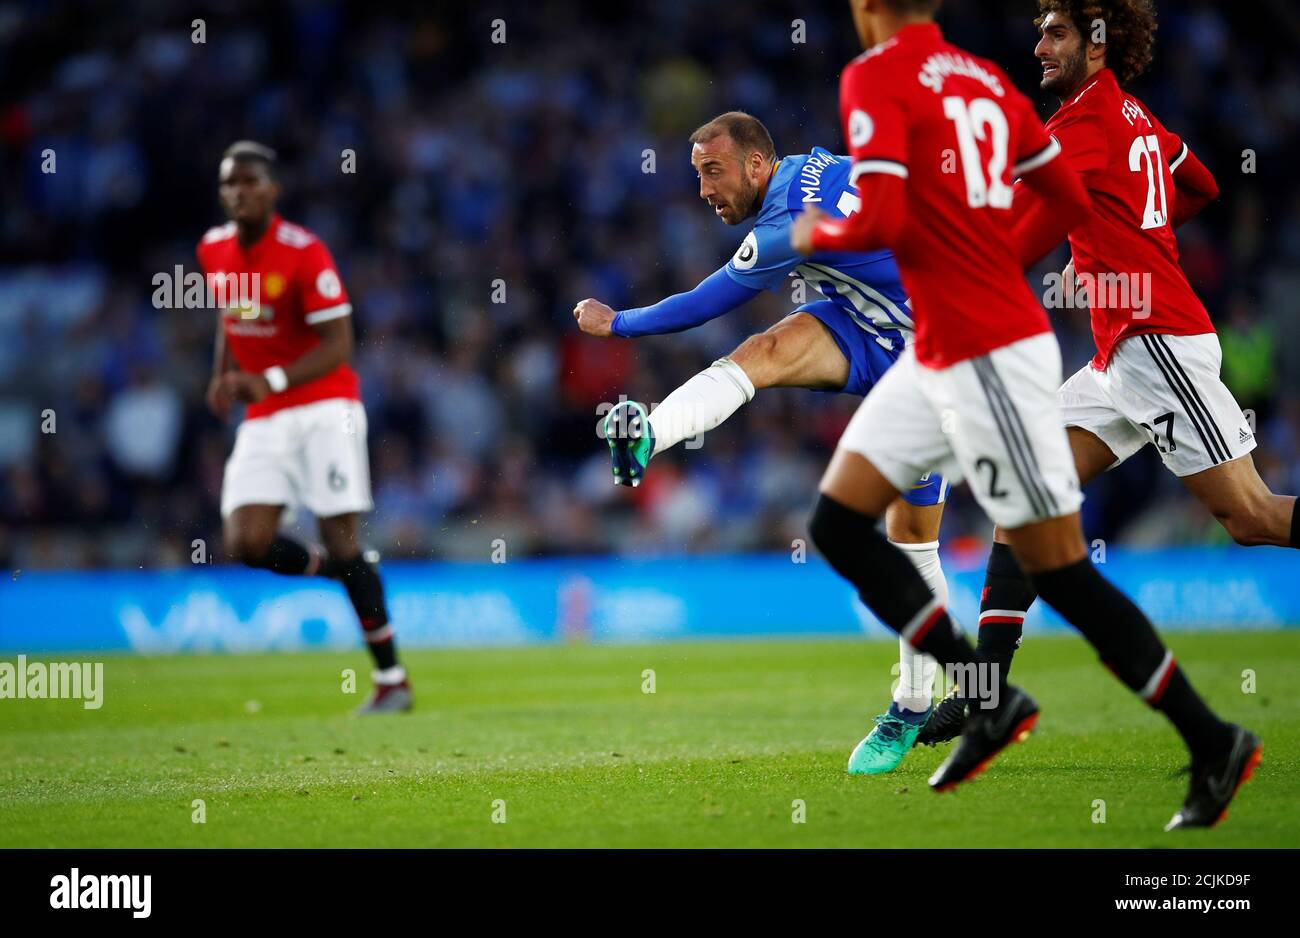 Soccer Football - Premier League - Brighton & Hove Albion v Manchester United - The American Express Community Stadium, Brighton, Britain - May 4, 2018   Brighton's Glenn Murray shoots at goal    REUTERS/Eddie Keogh    EDITORIAL USE ONLY. No use with unauthorized audio, video, data, fixture lists, club/league logos or "live" services. Online in-match use limited to 75 images, no video emulation. No use in betting, games or single club/league/player publications.  Please contact your account representative for further details. Stock Photo